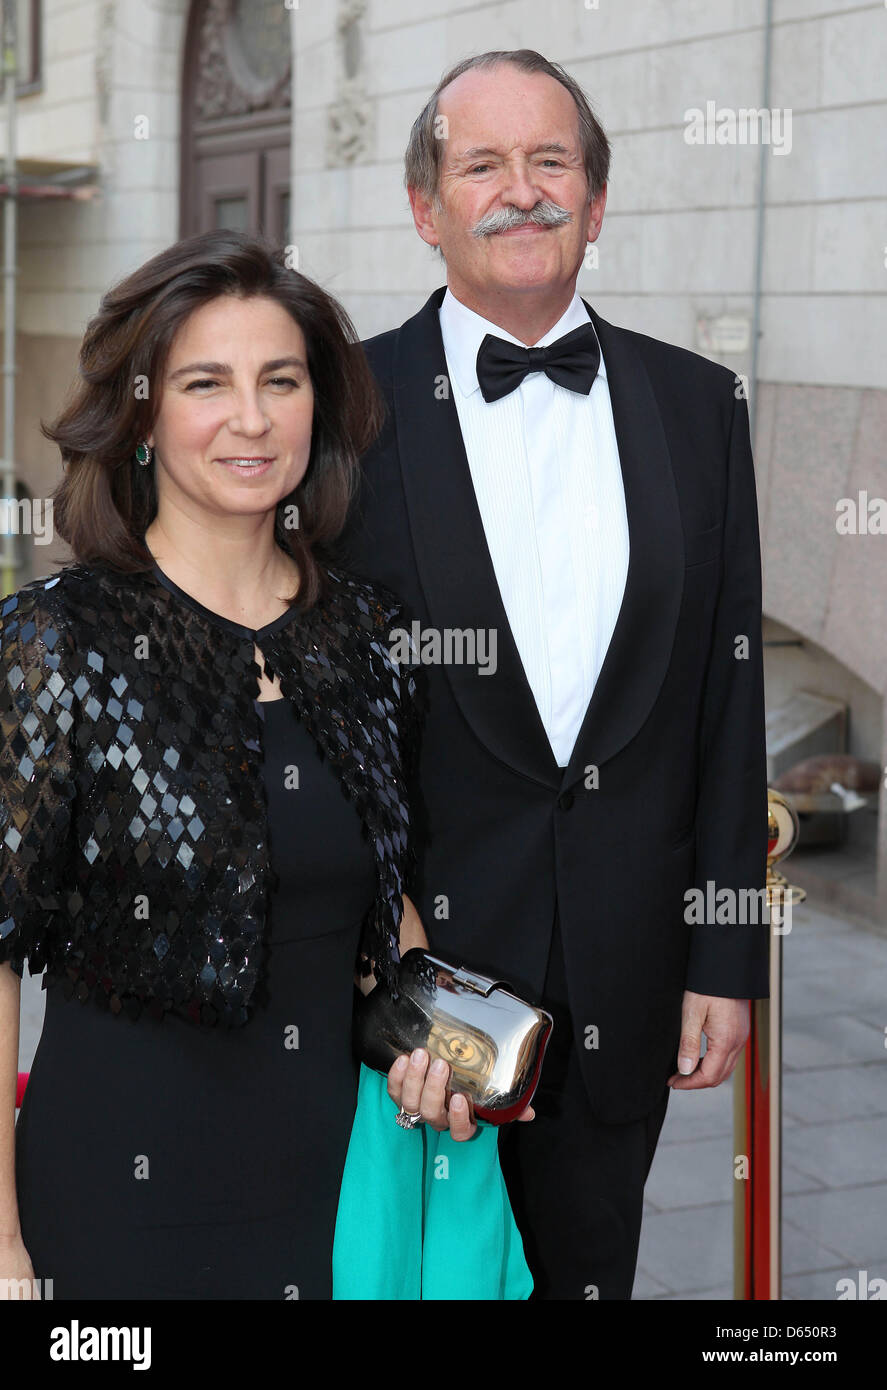 Duarte Pio, Duke of Braganza and Isabel, Duchess of Braganza, arrives for  the opening of Marianne & Sigvard Bernadotte Art Awards Gala 2012 in  Stockholm, Sweden, 07 June 2012. Photo: Albert Nieboer /